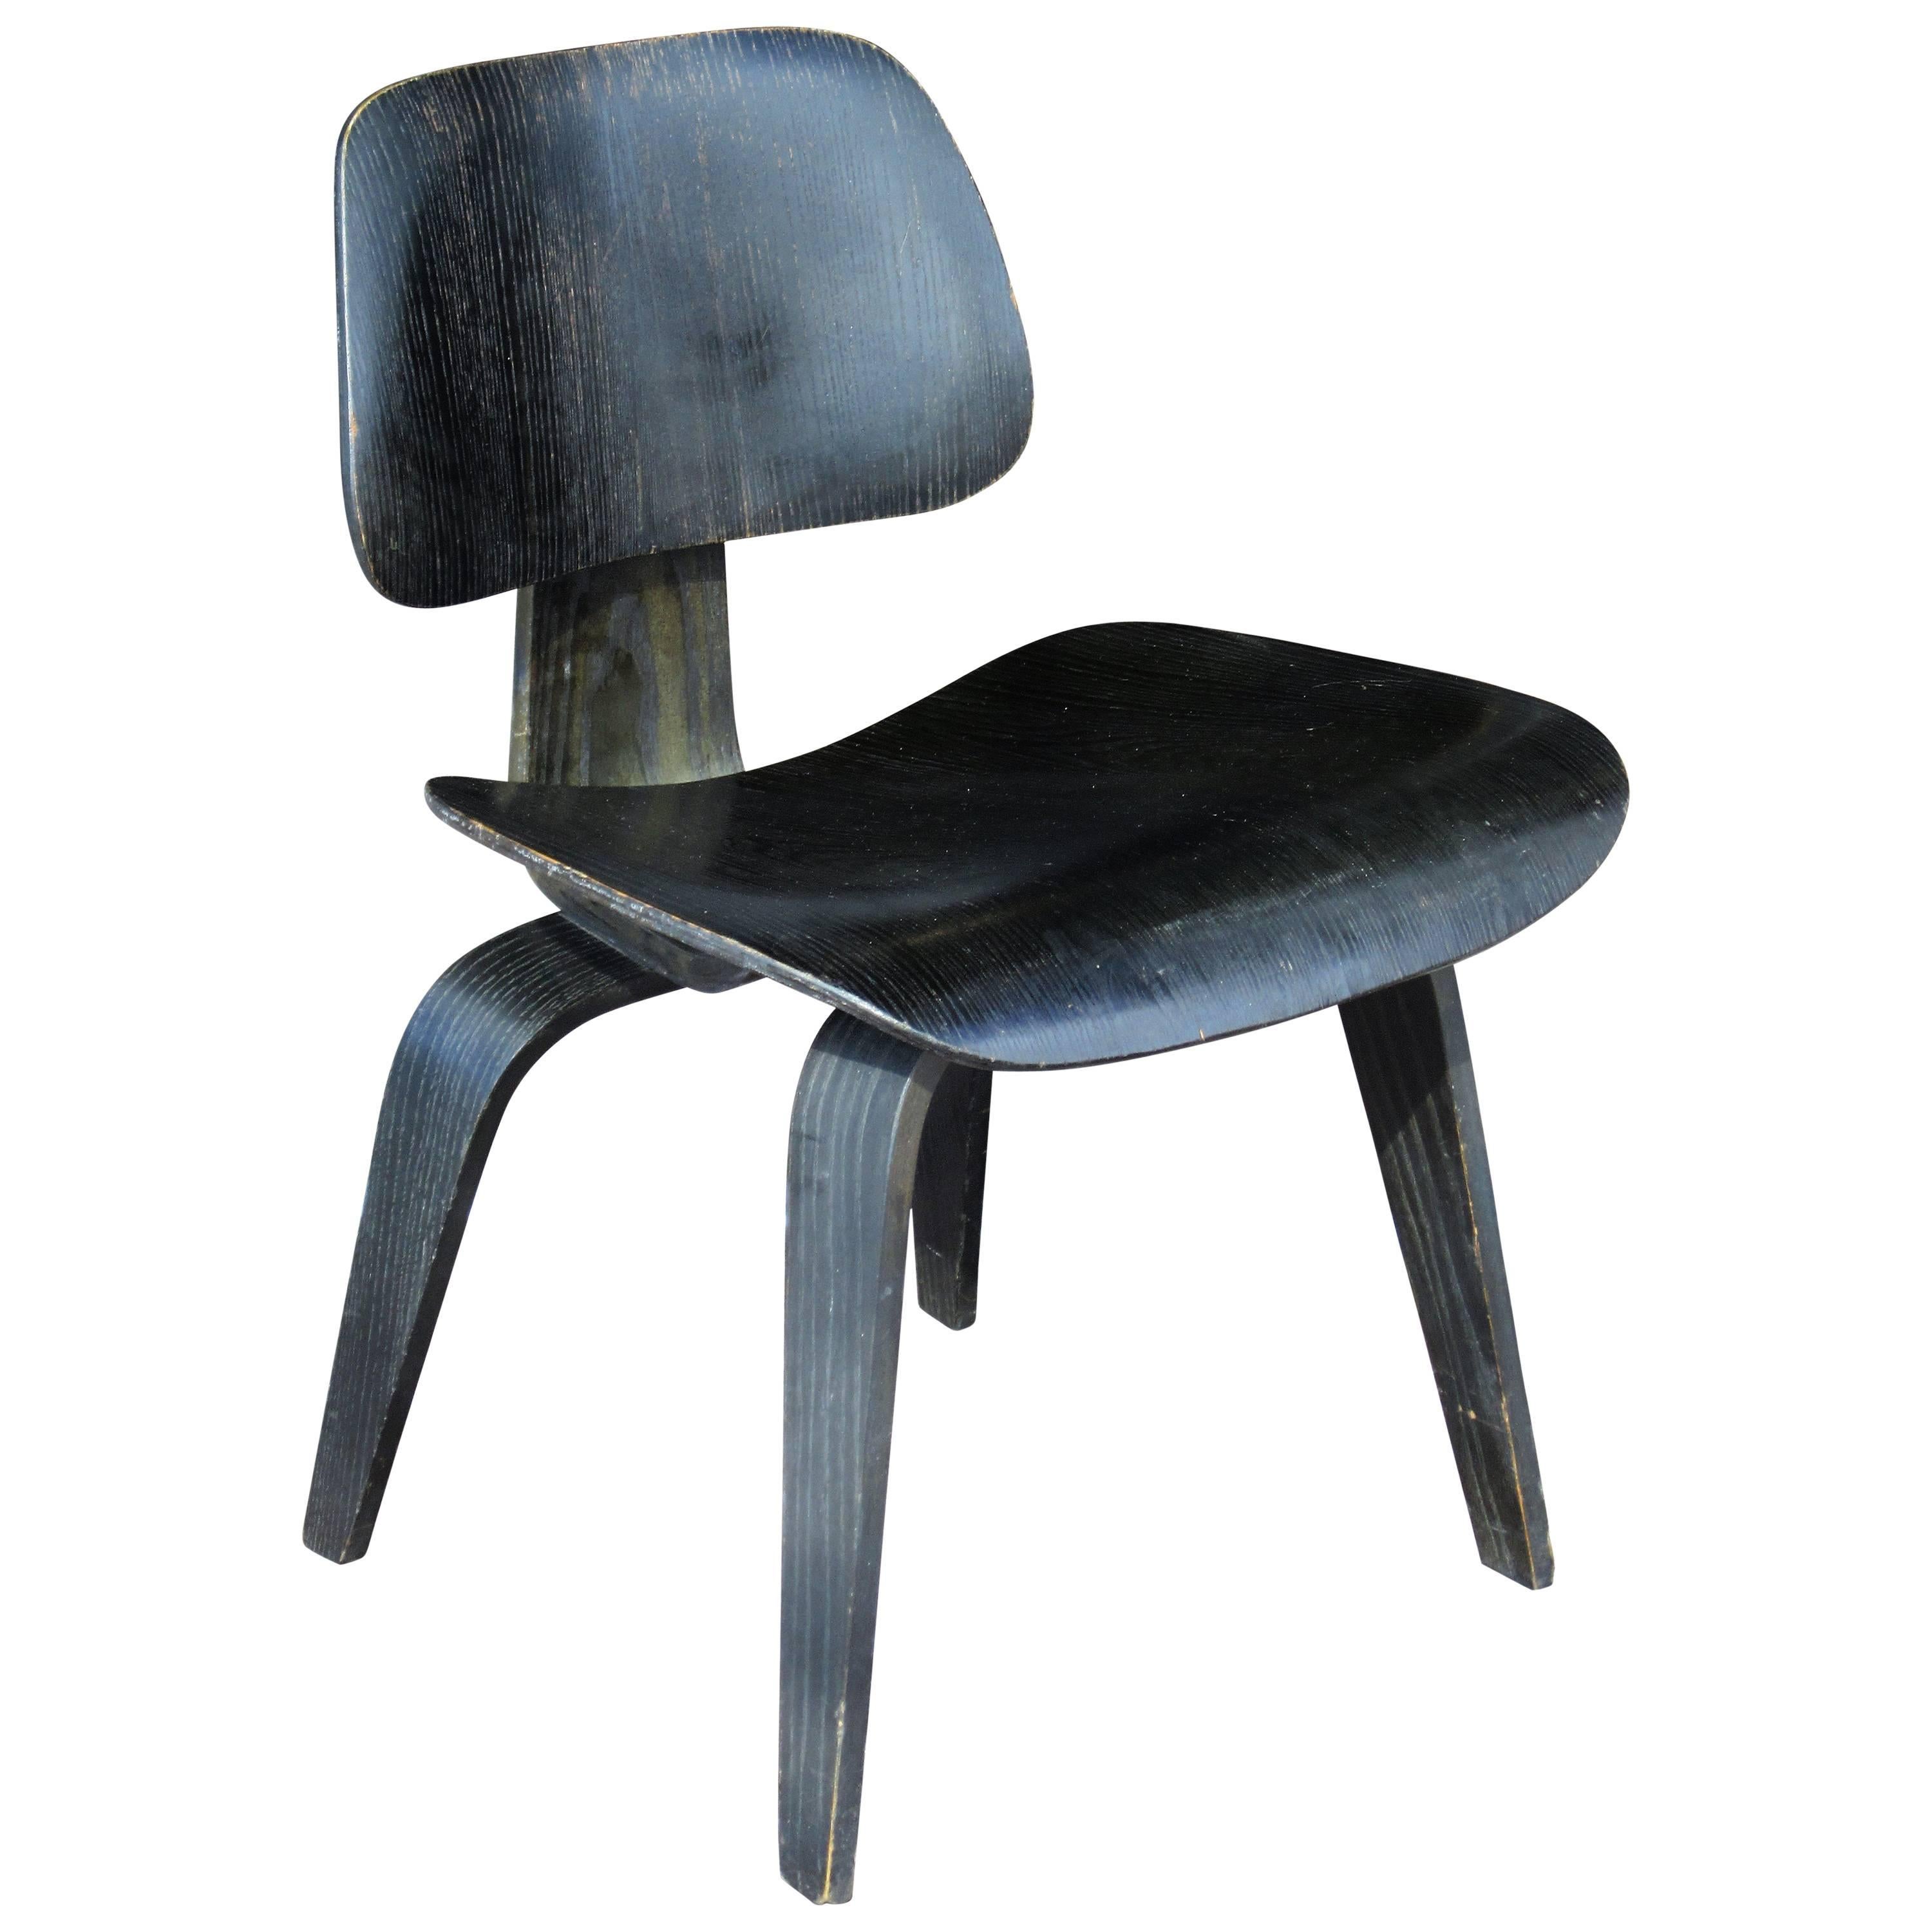  Early Eames DCW Chair Black Aniline